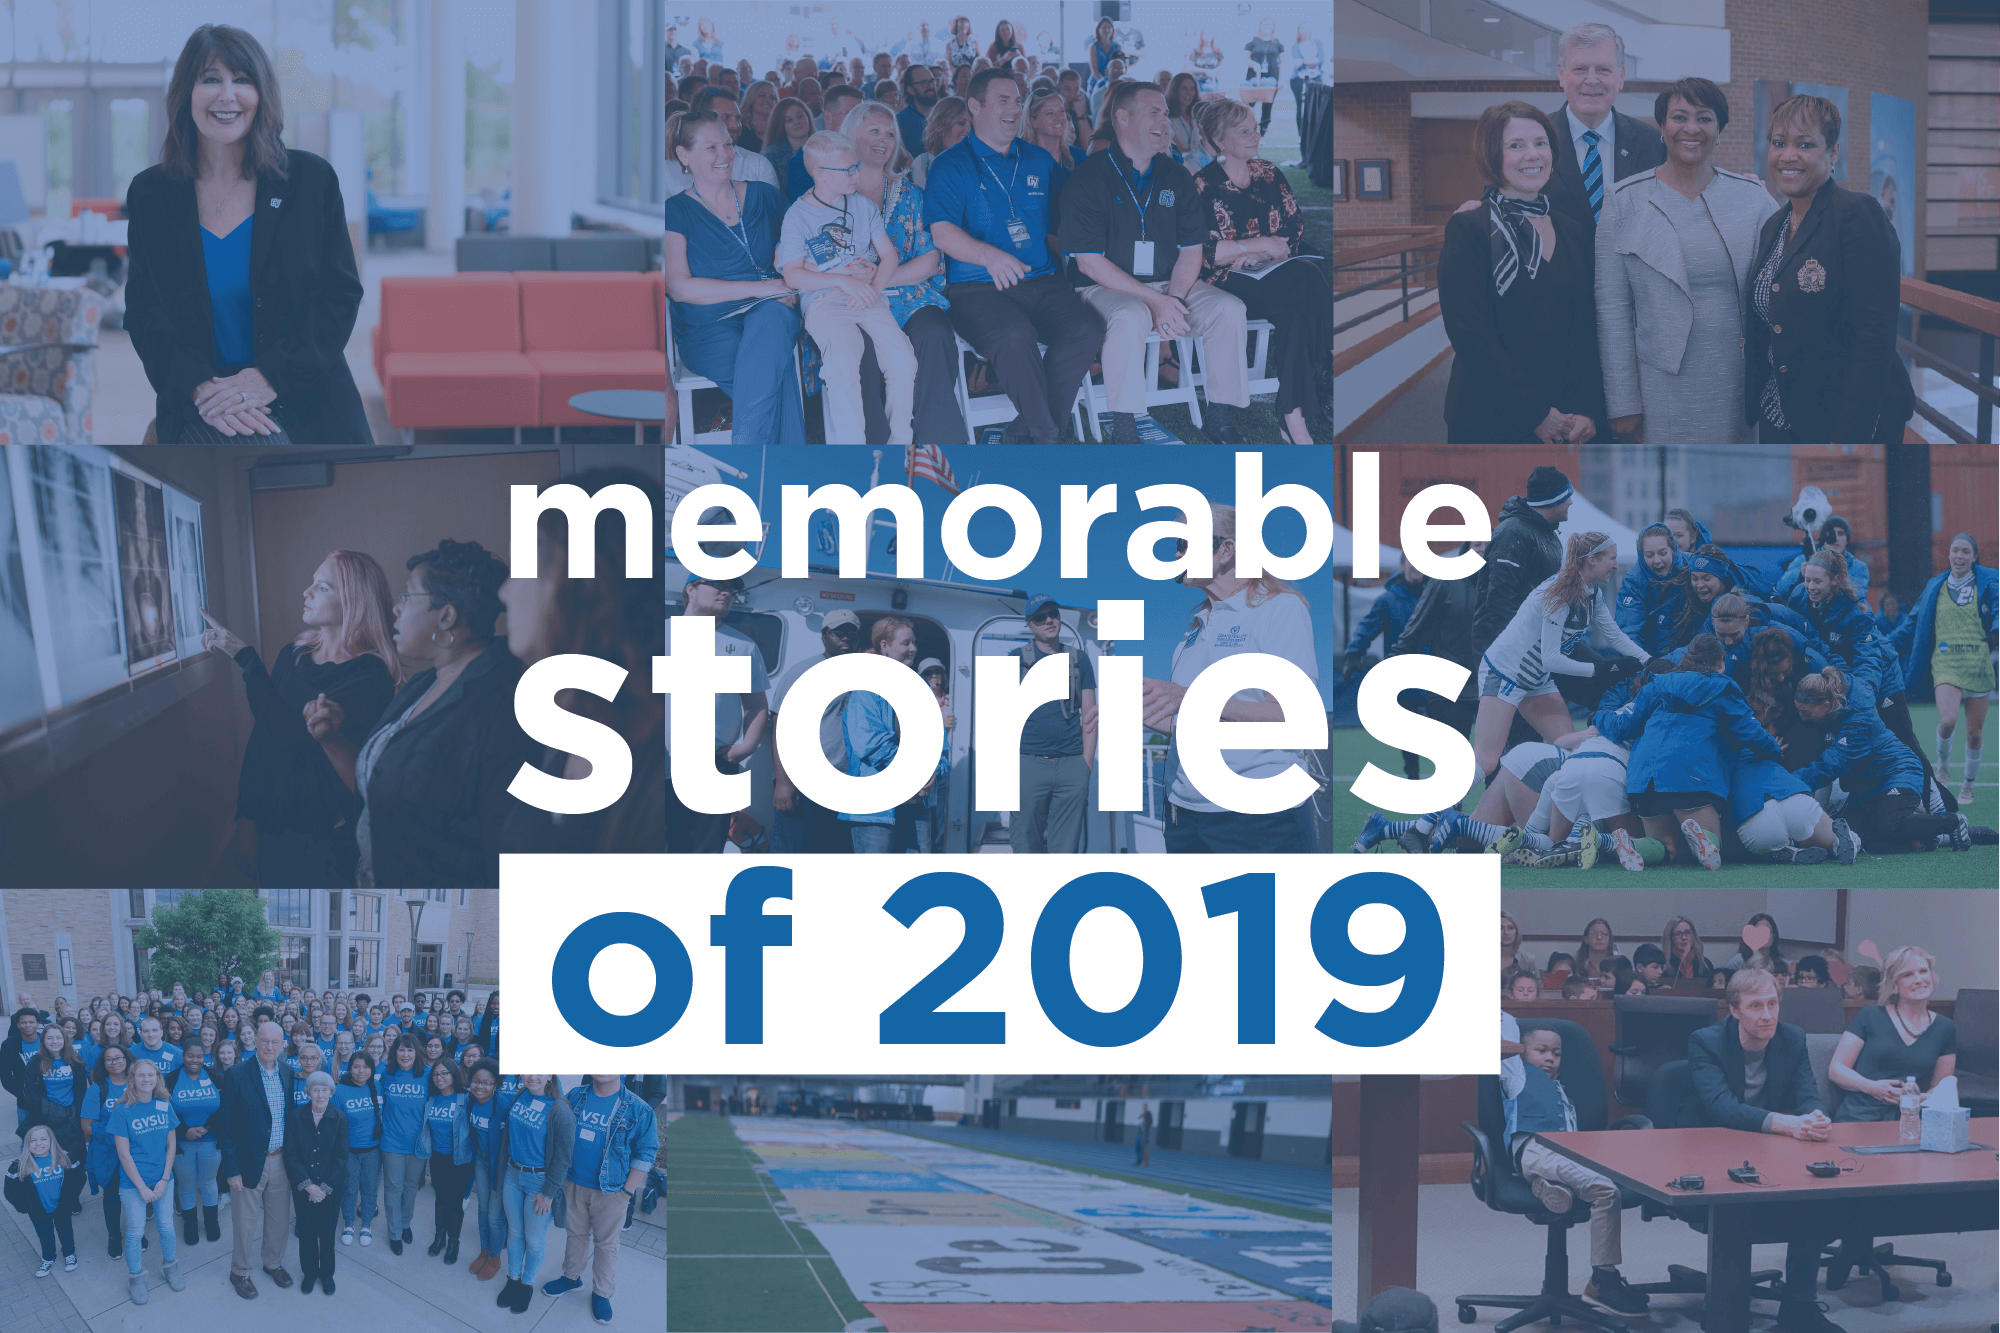 A collage of photos from the memorable stories of 2019